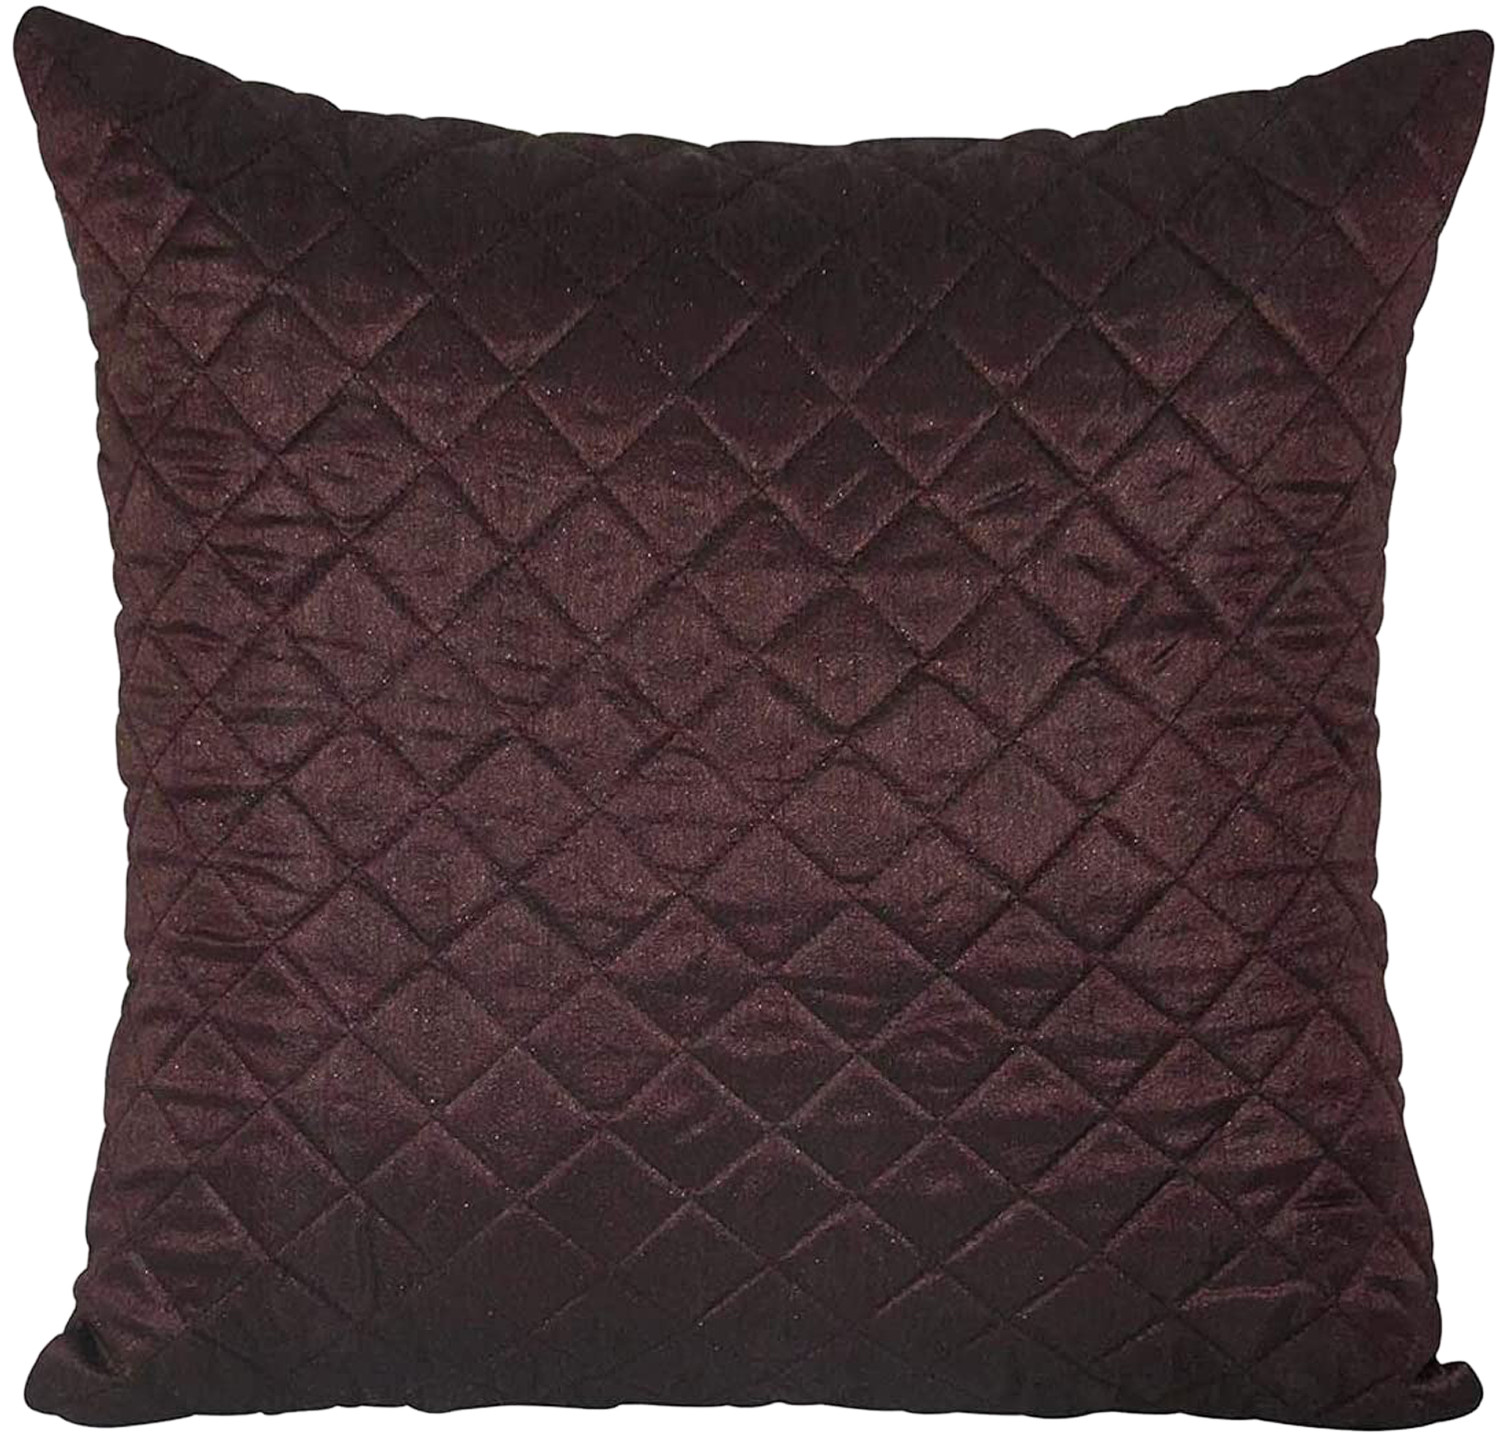 Kuber Industries Quilted Soft Decorative Square Throw Pillow Cover, Cushion Covers, Pillow Case For Sofa Couch Bed Chair, 18x18 Inch-(Maroon & Cream)-HS_38_KUBMART21779